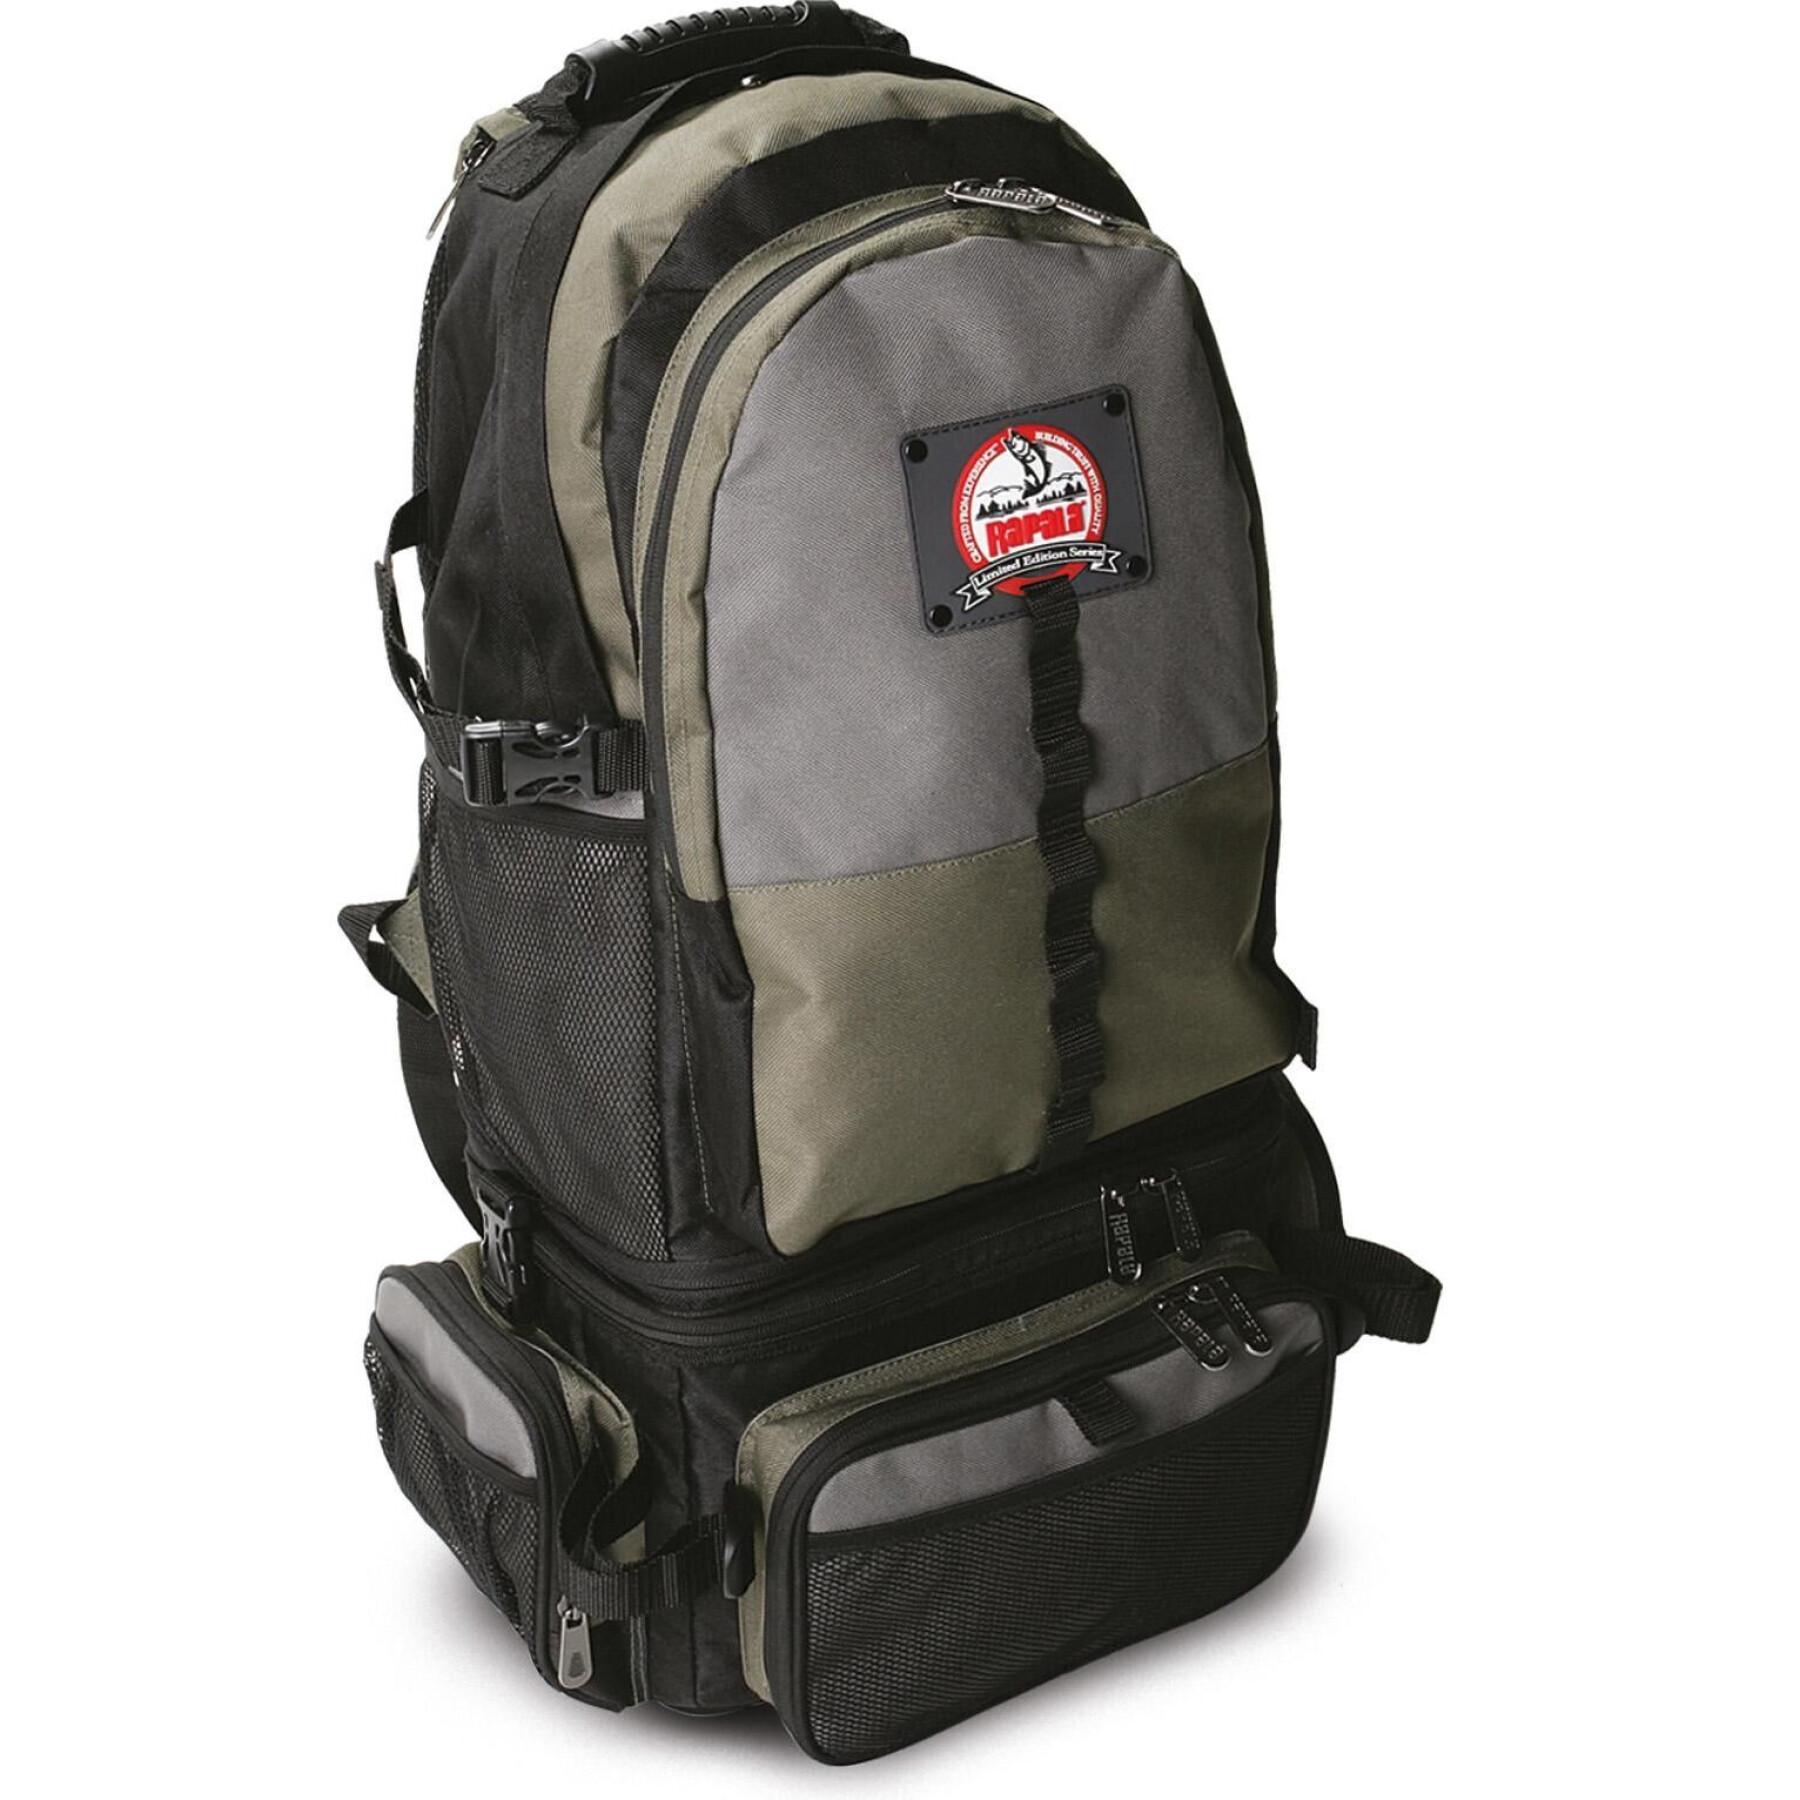 Backpack Rapala 3 in 1 Combo